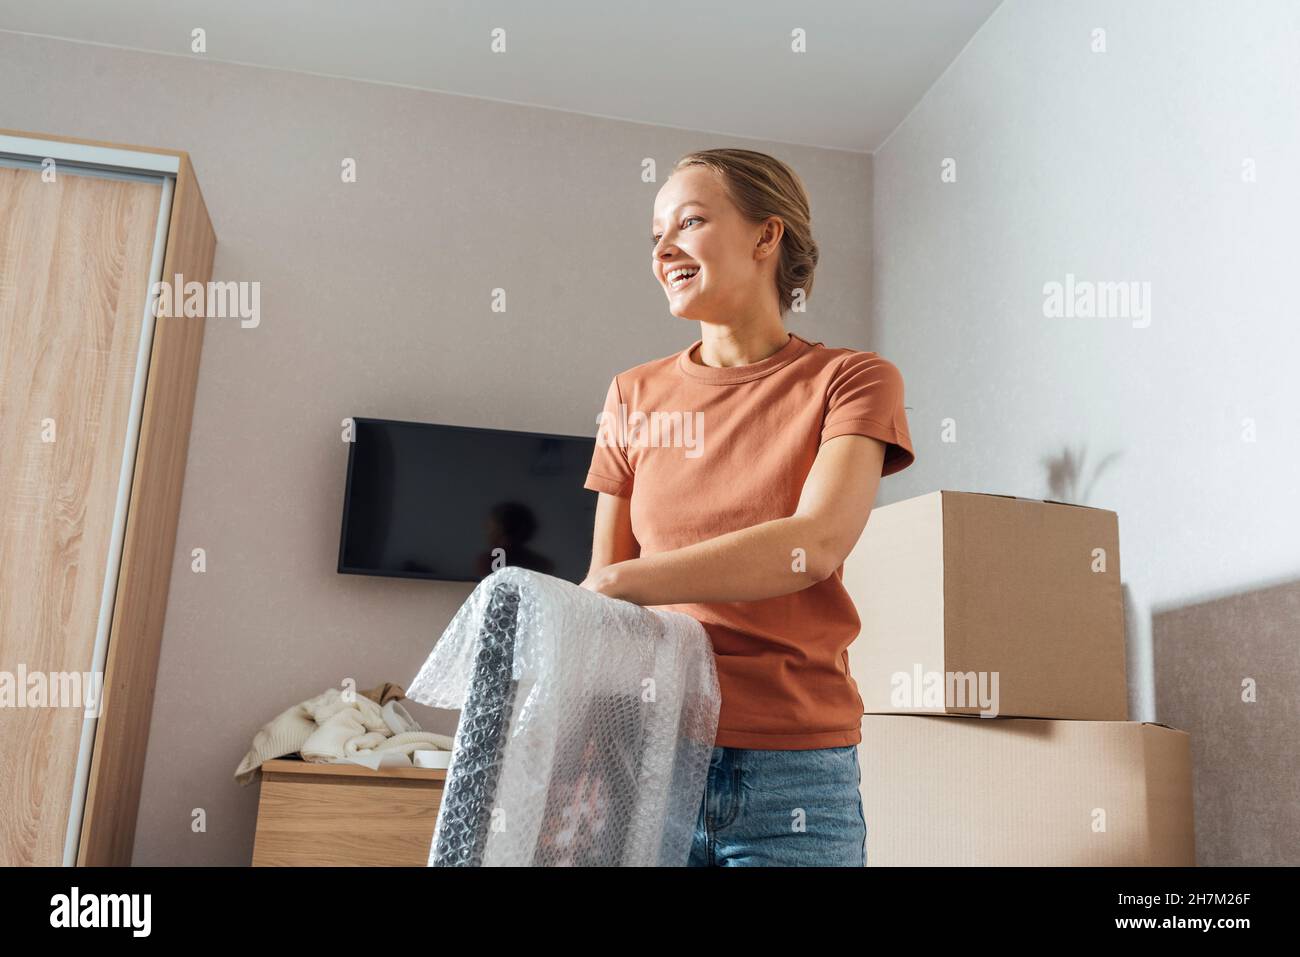 Smiling woman removing bubble wrap from picture frame at home Stock Photo